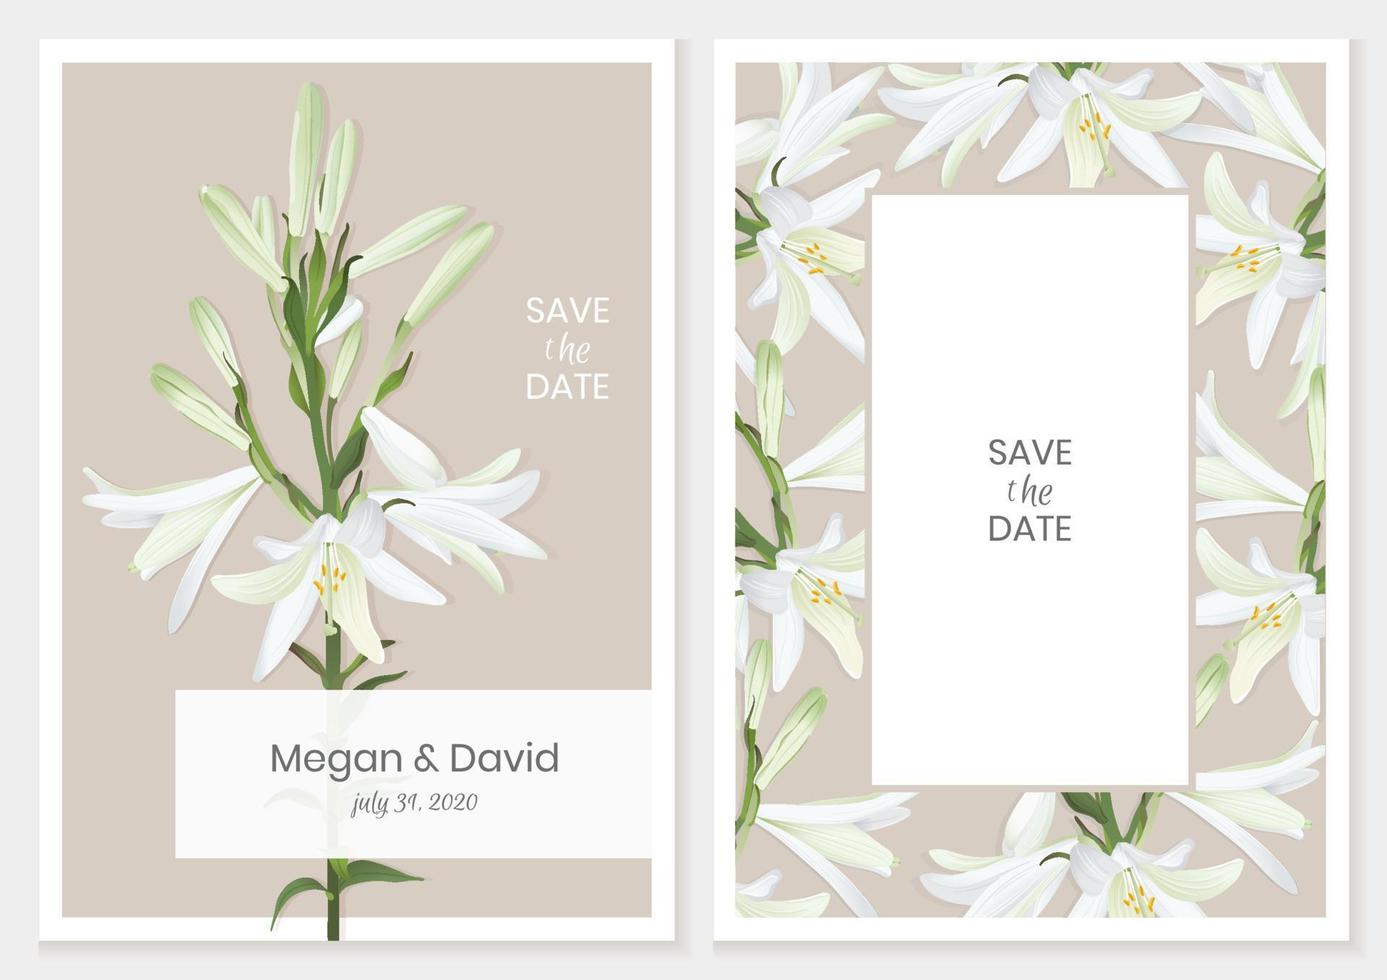 Botanical wedding invitation card, template design with white lilies on a beige background. Stock vector illustration.